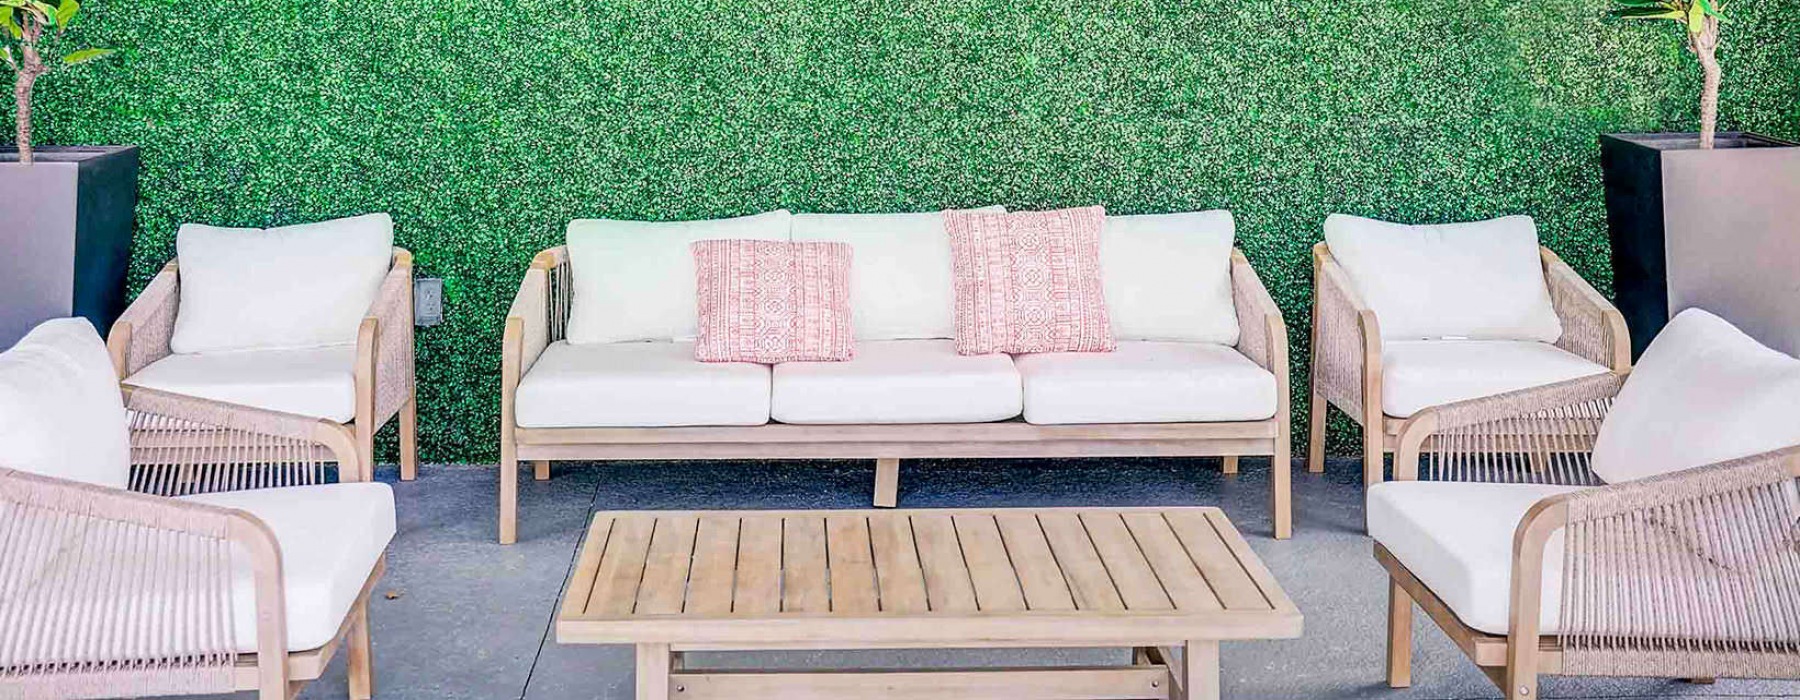 outdoor patio with furnishings in front of a plant covered wall